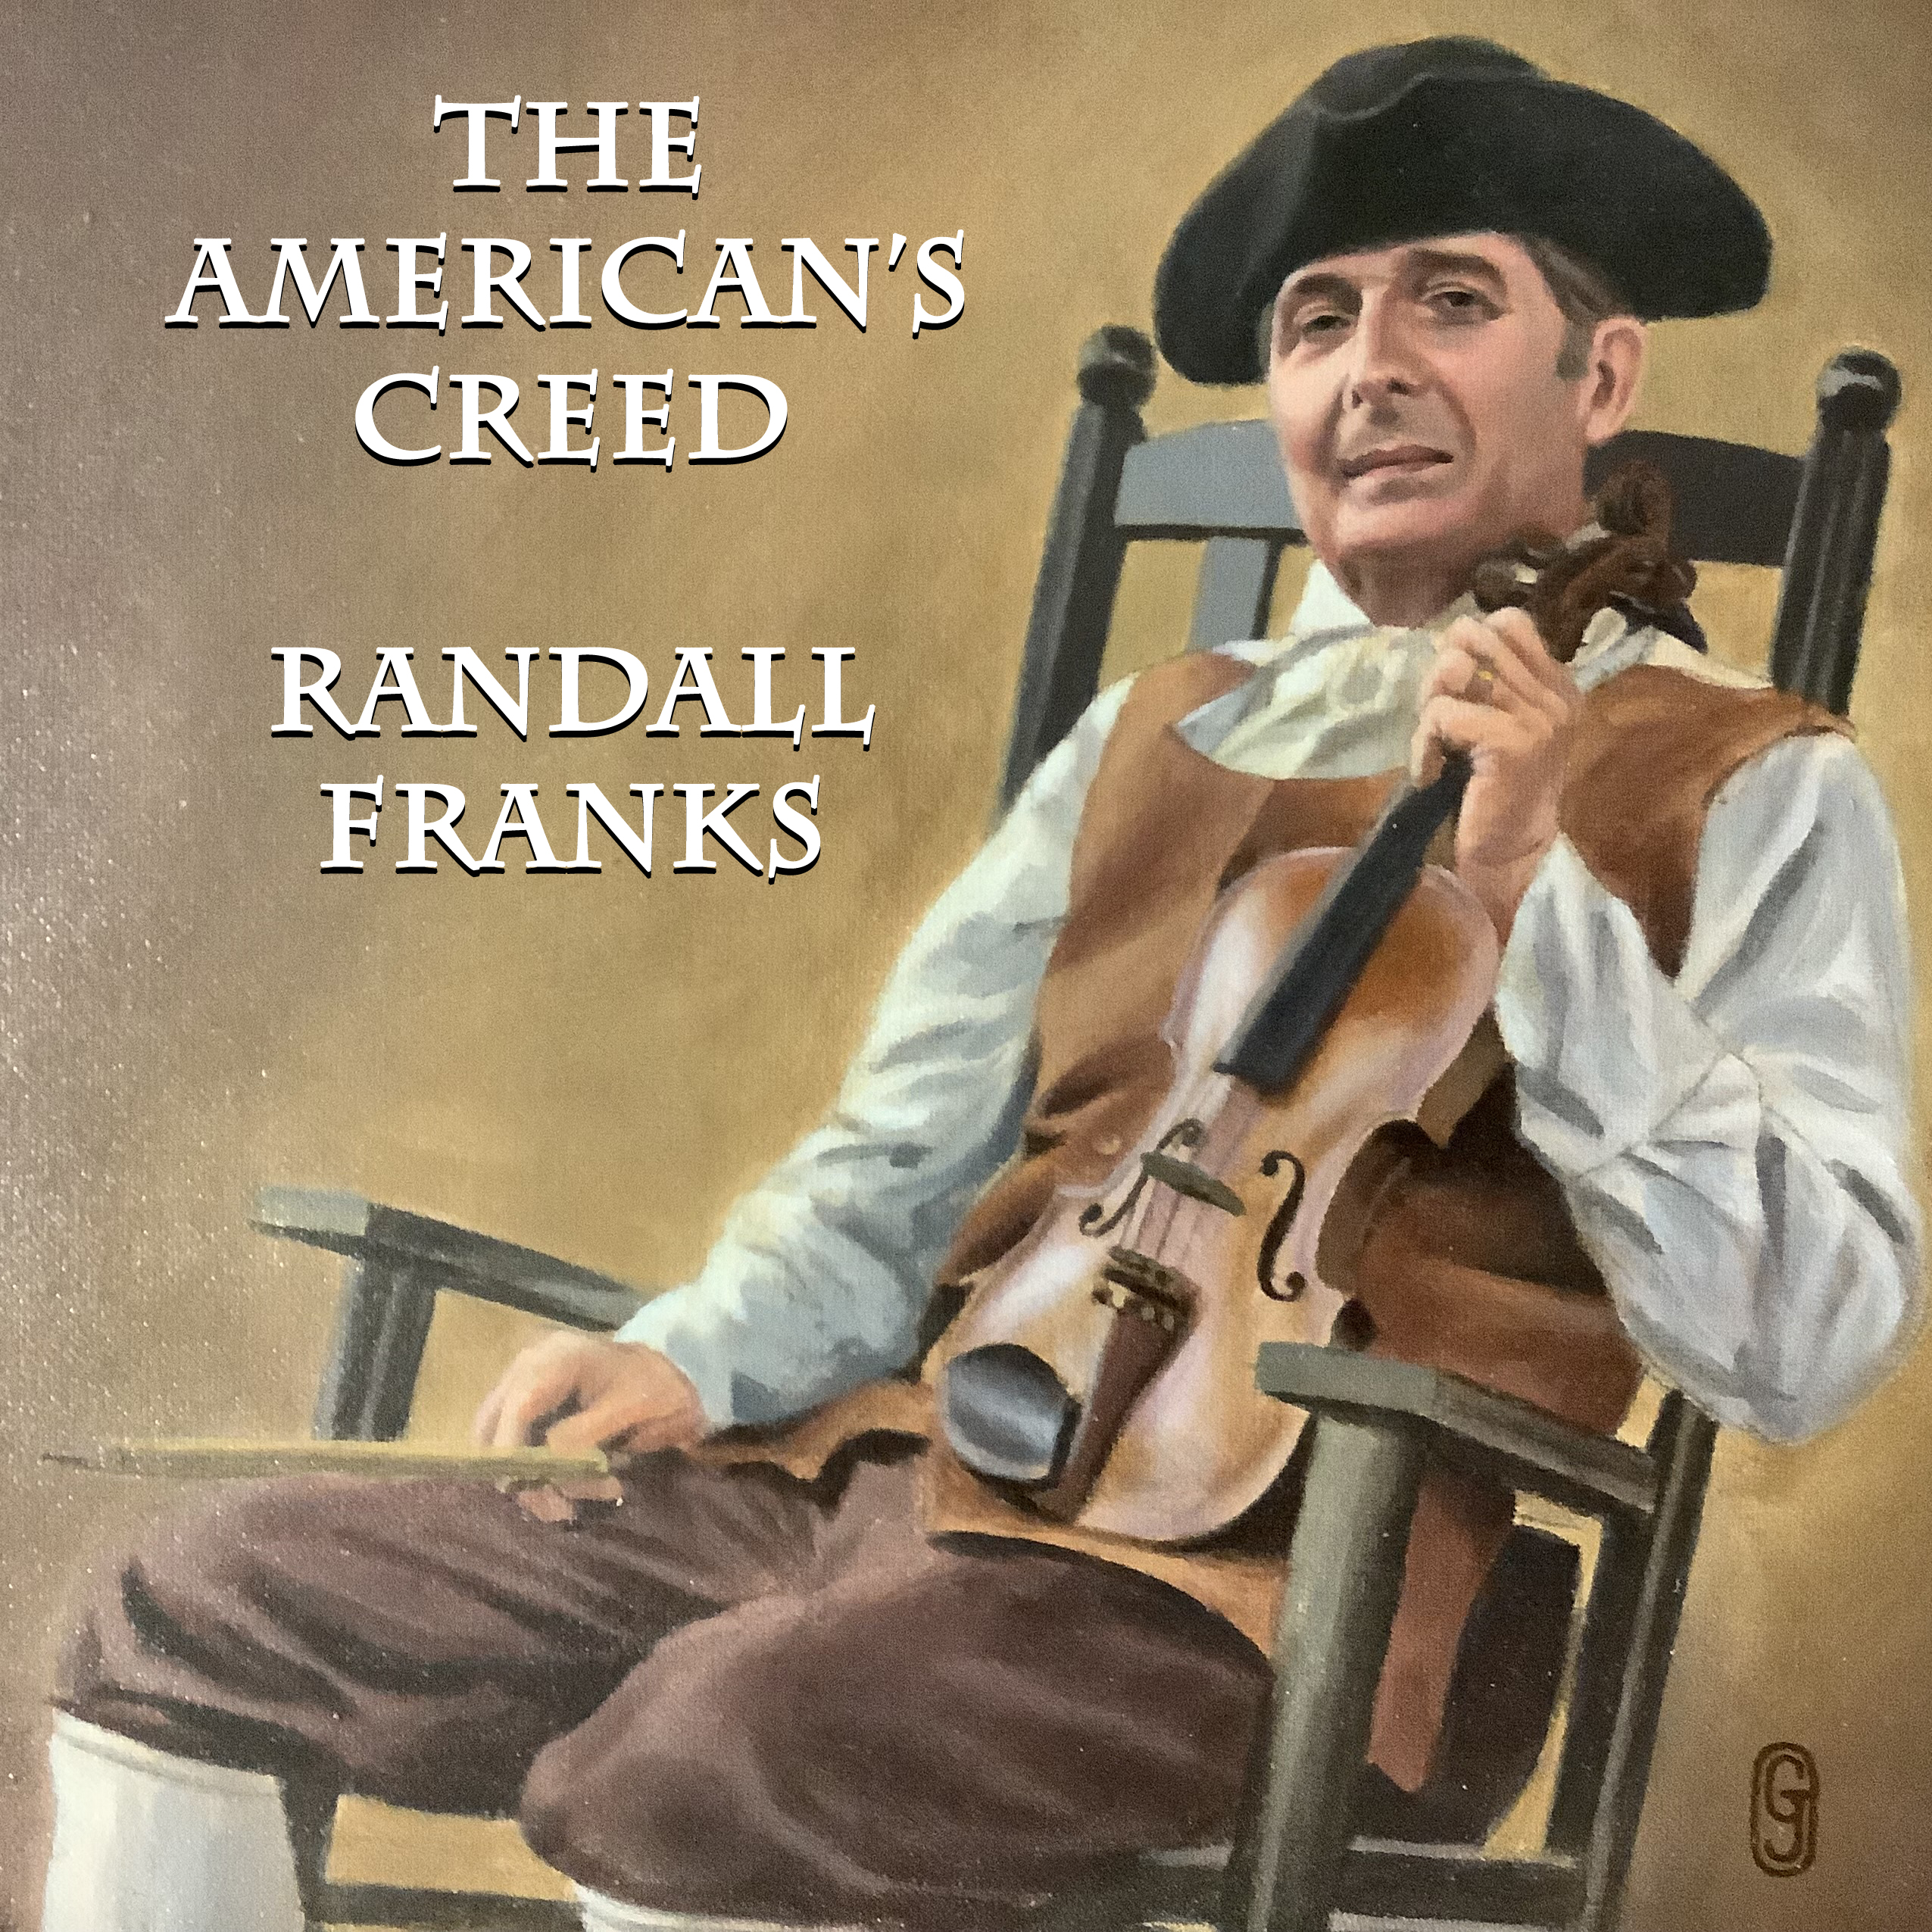 Actor/Entertainer Randall Franks releases "The American’s Creed" album on AirPlay Direct and Itunes